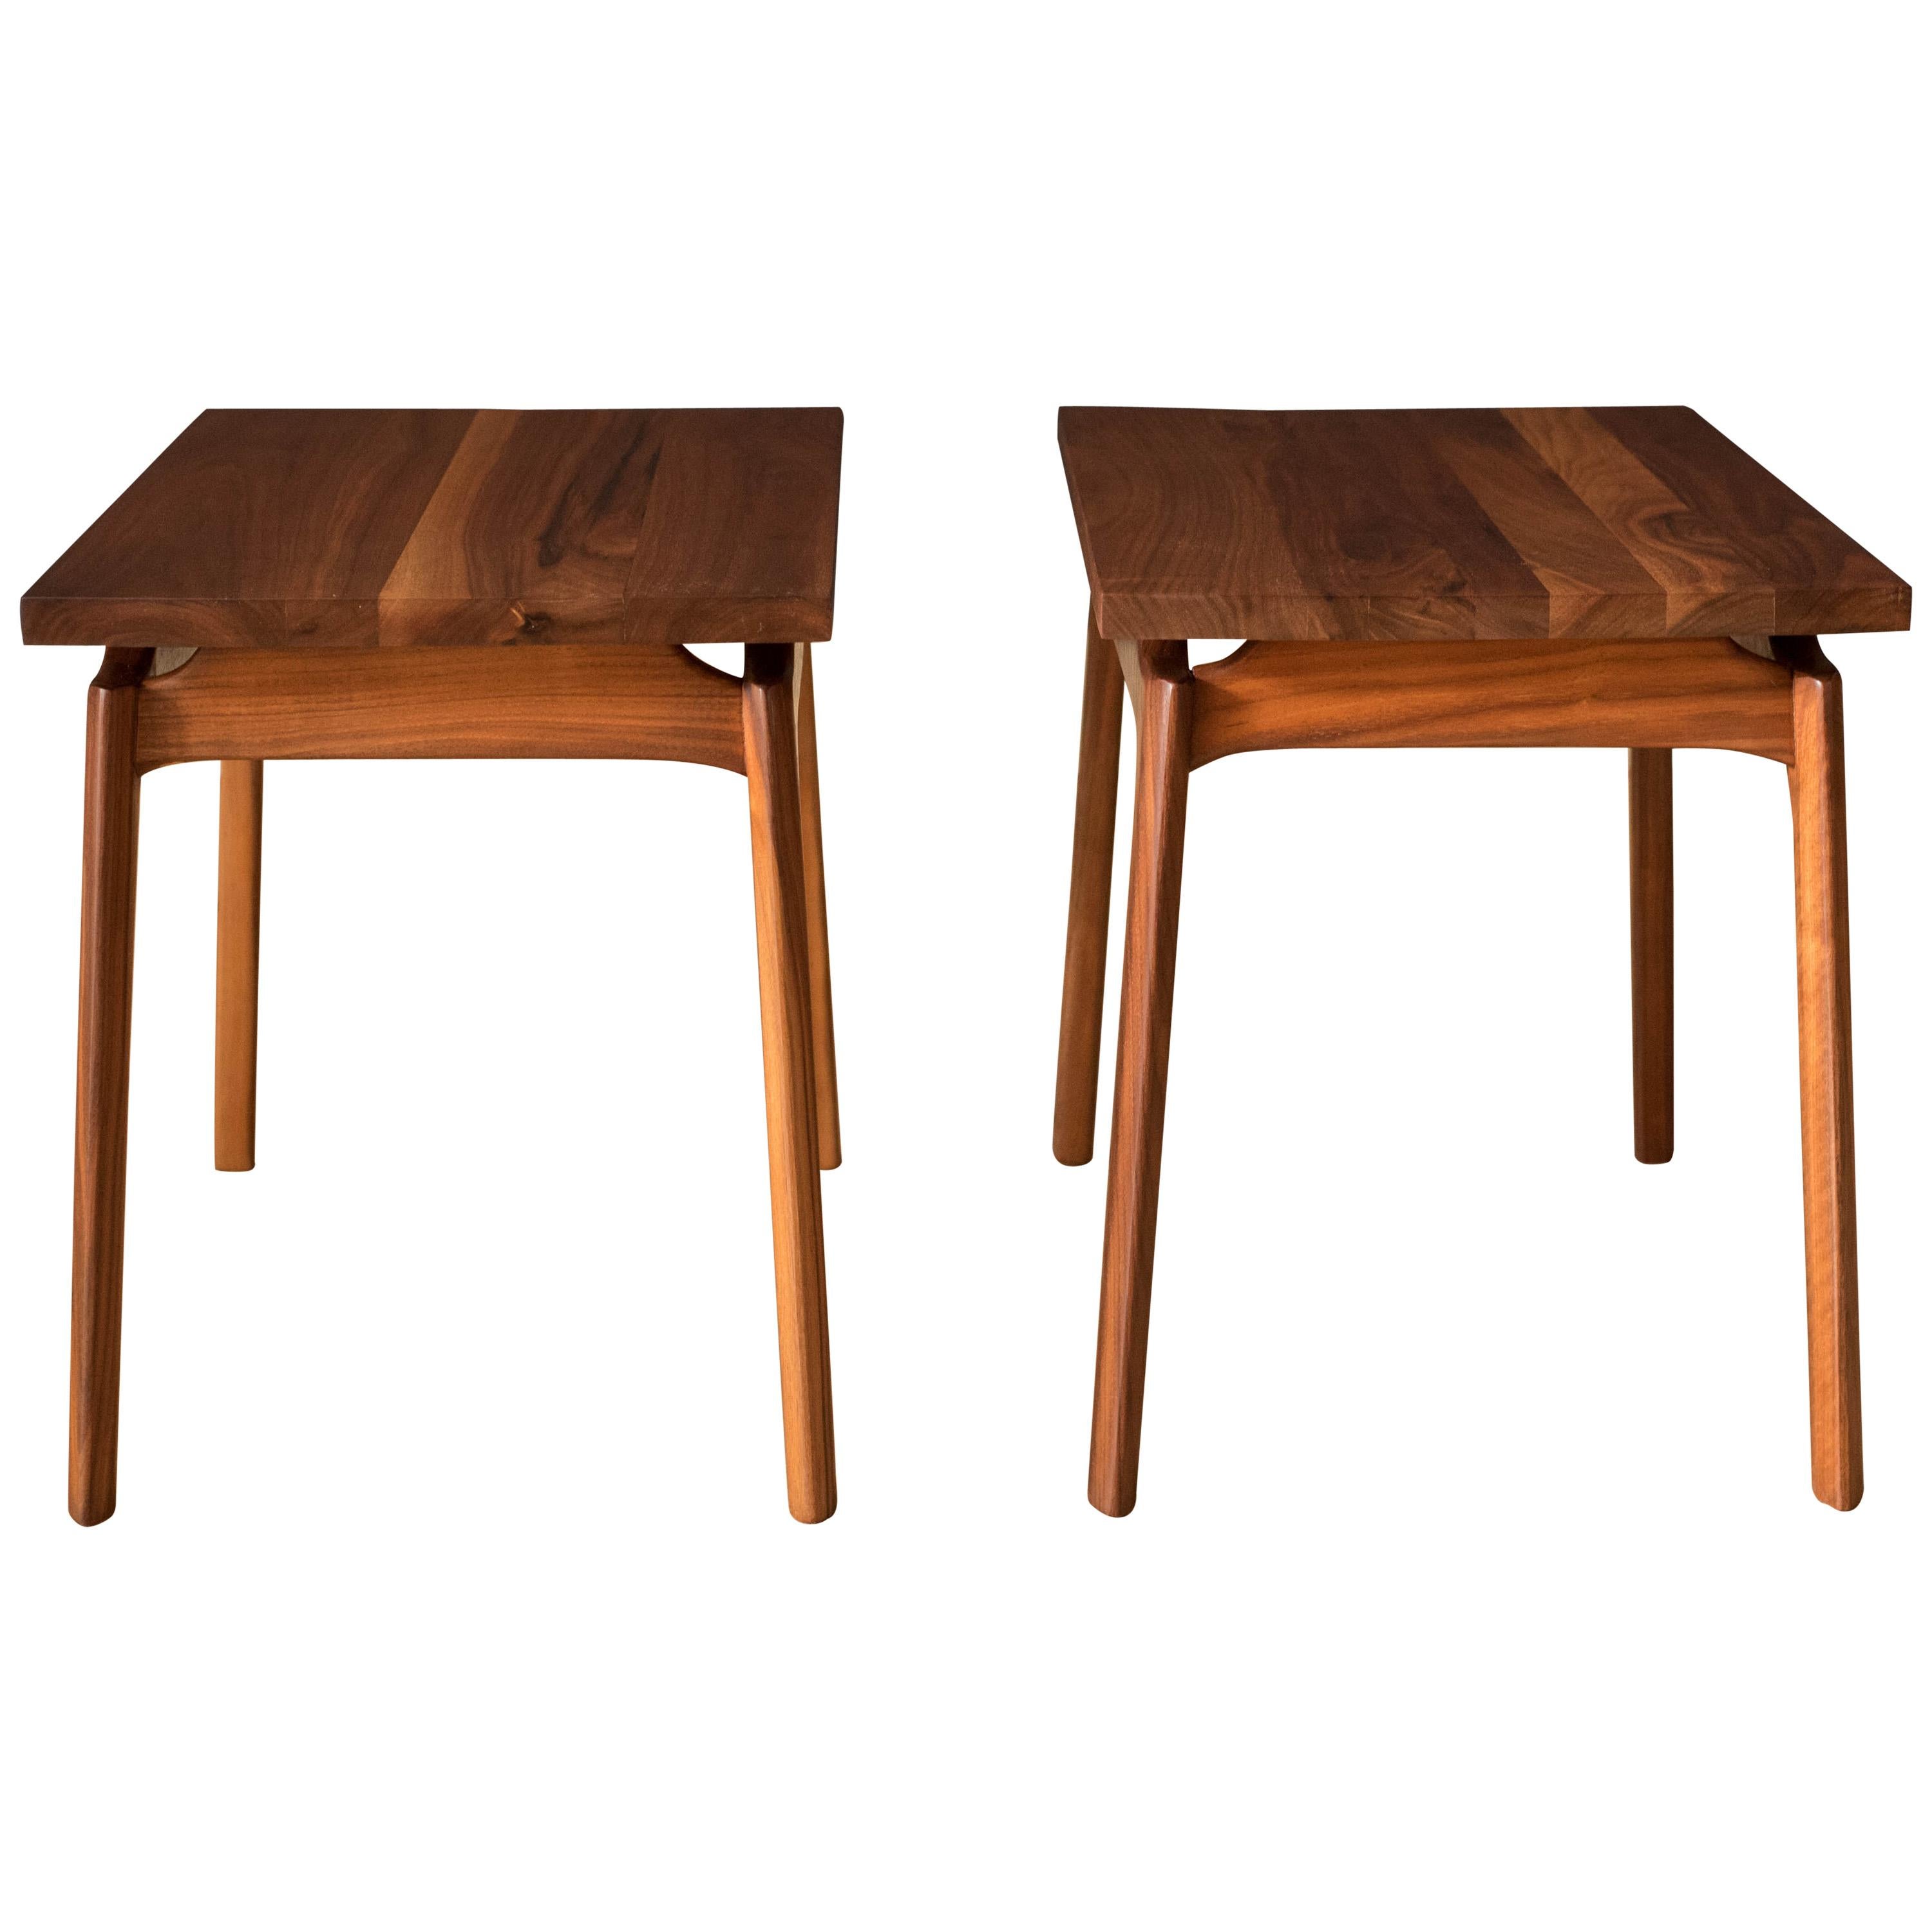 Pair of Mid-Century Modern Solid Walnut End Tables